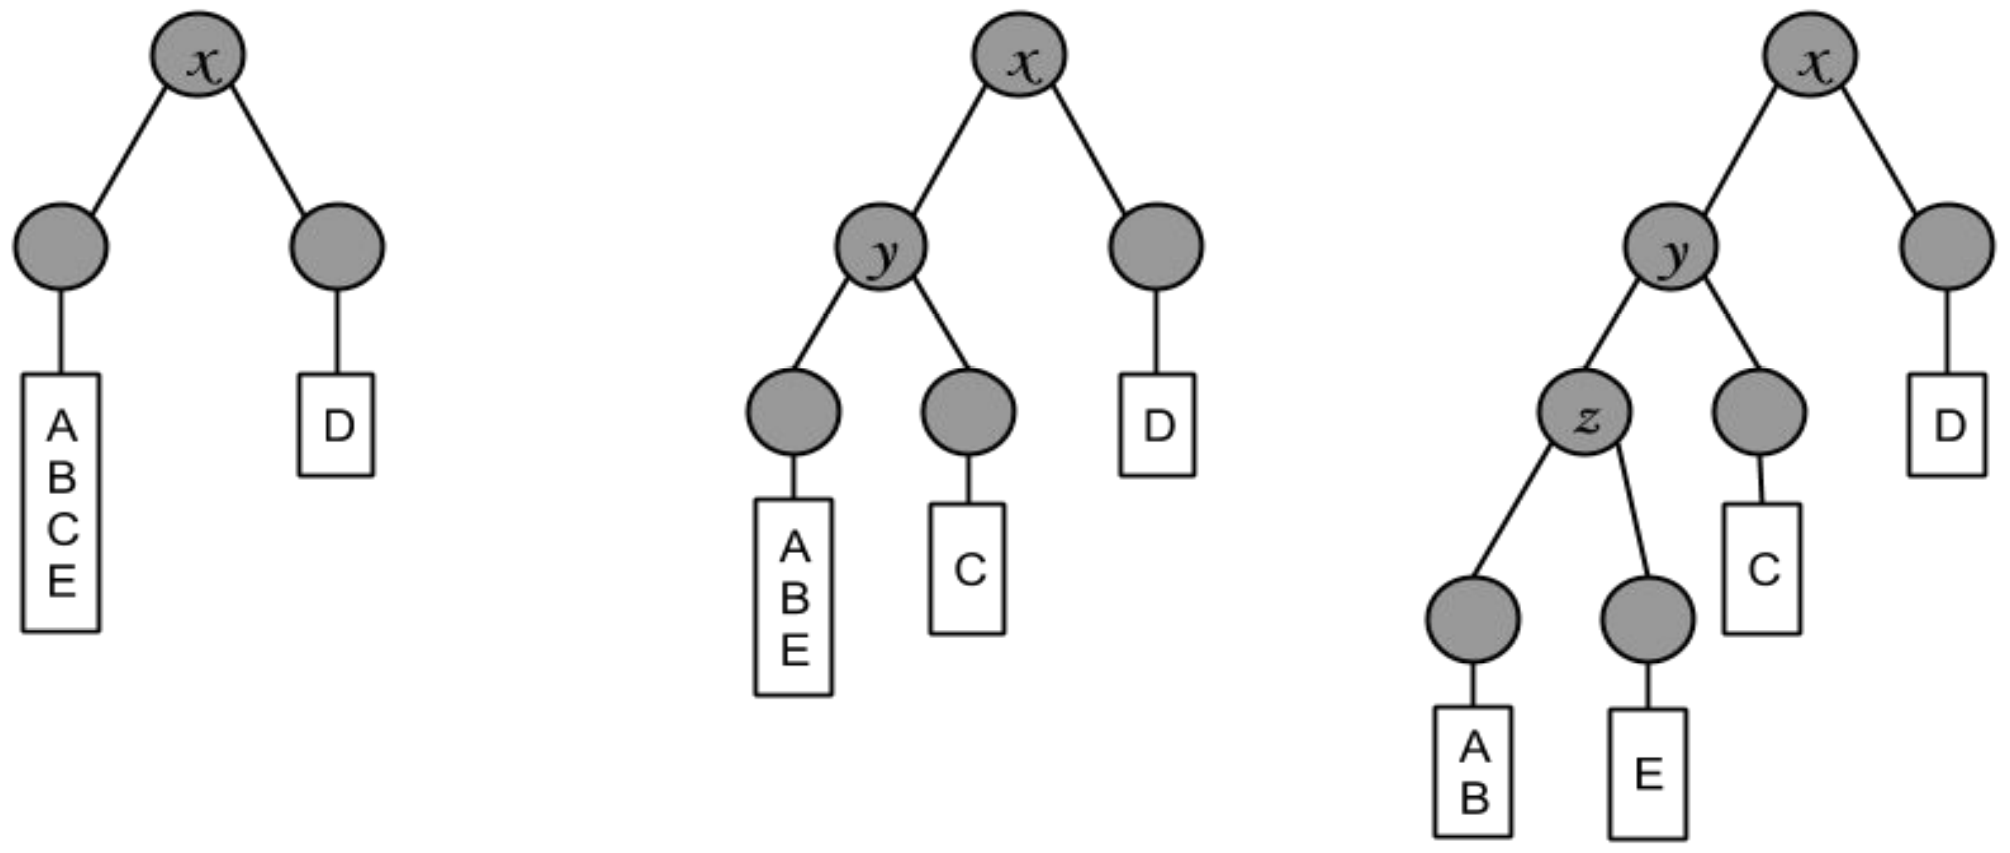 Construct a binary search tree from the random projection